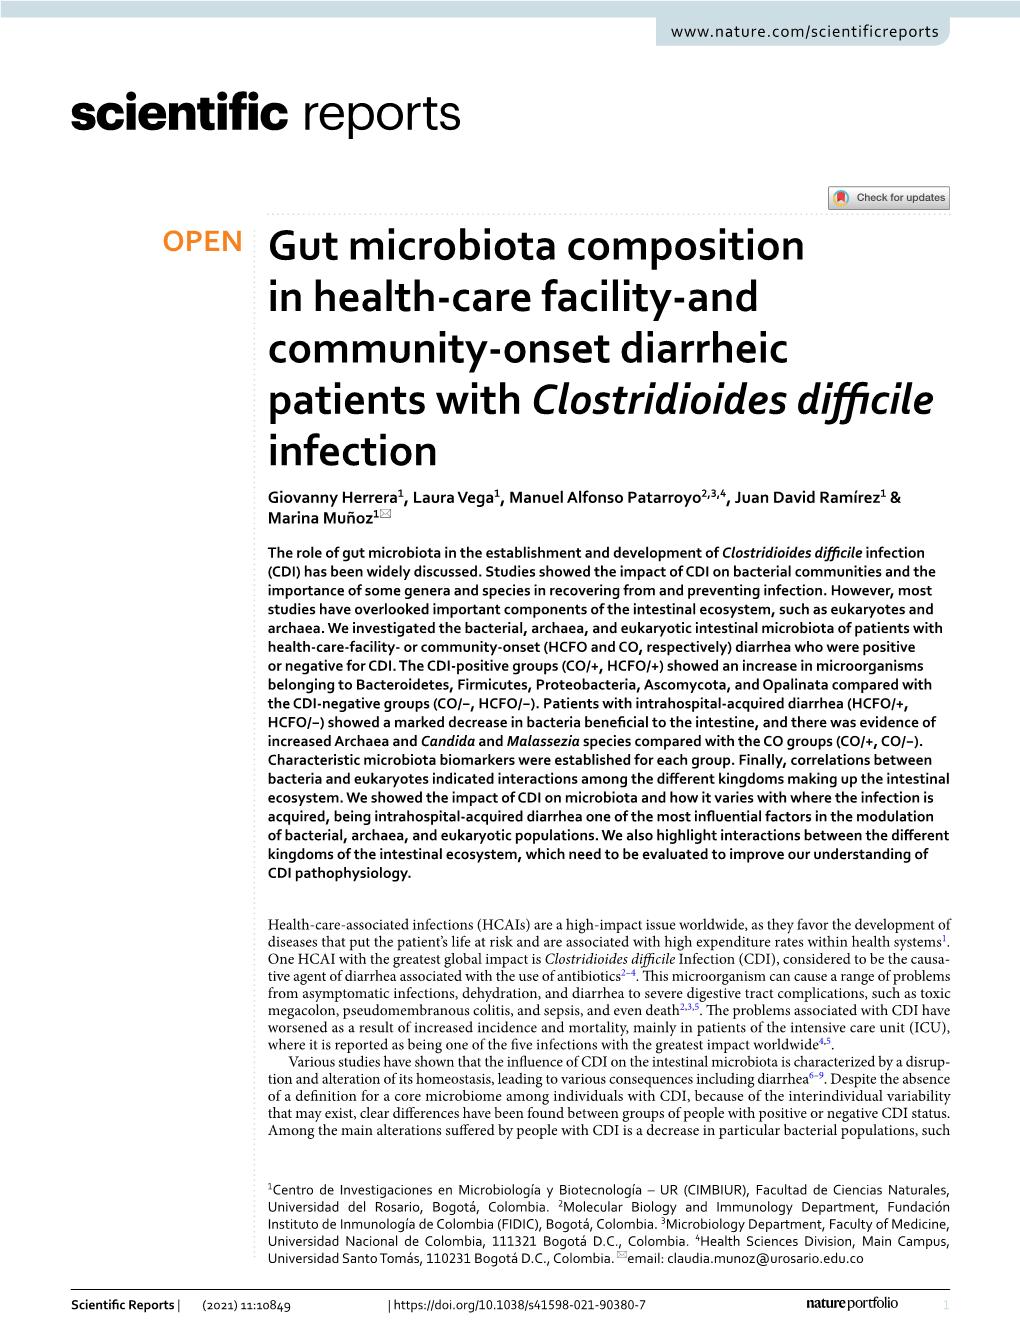 Gut Microbiota Composition in Health-Care Facility-And Community